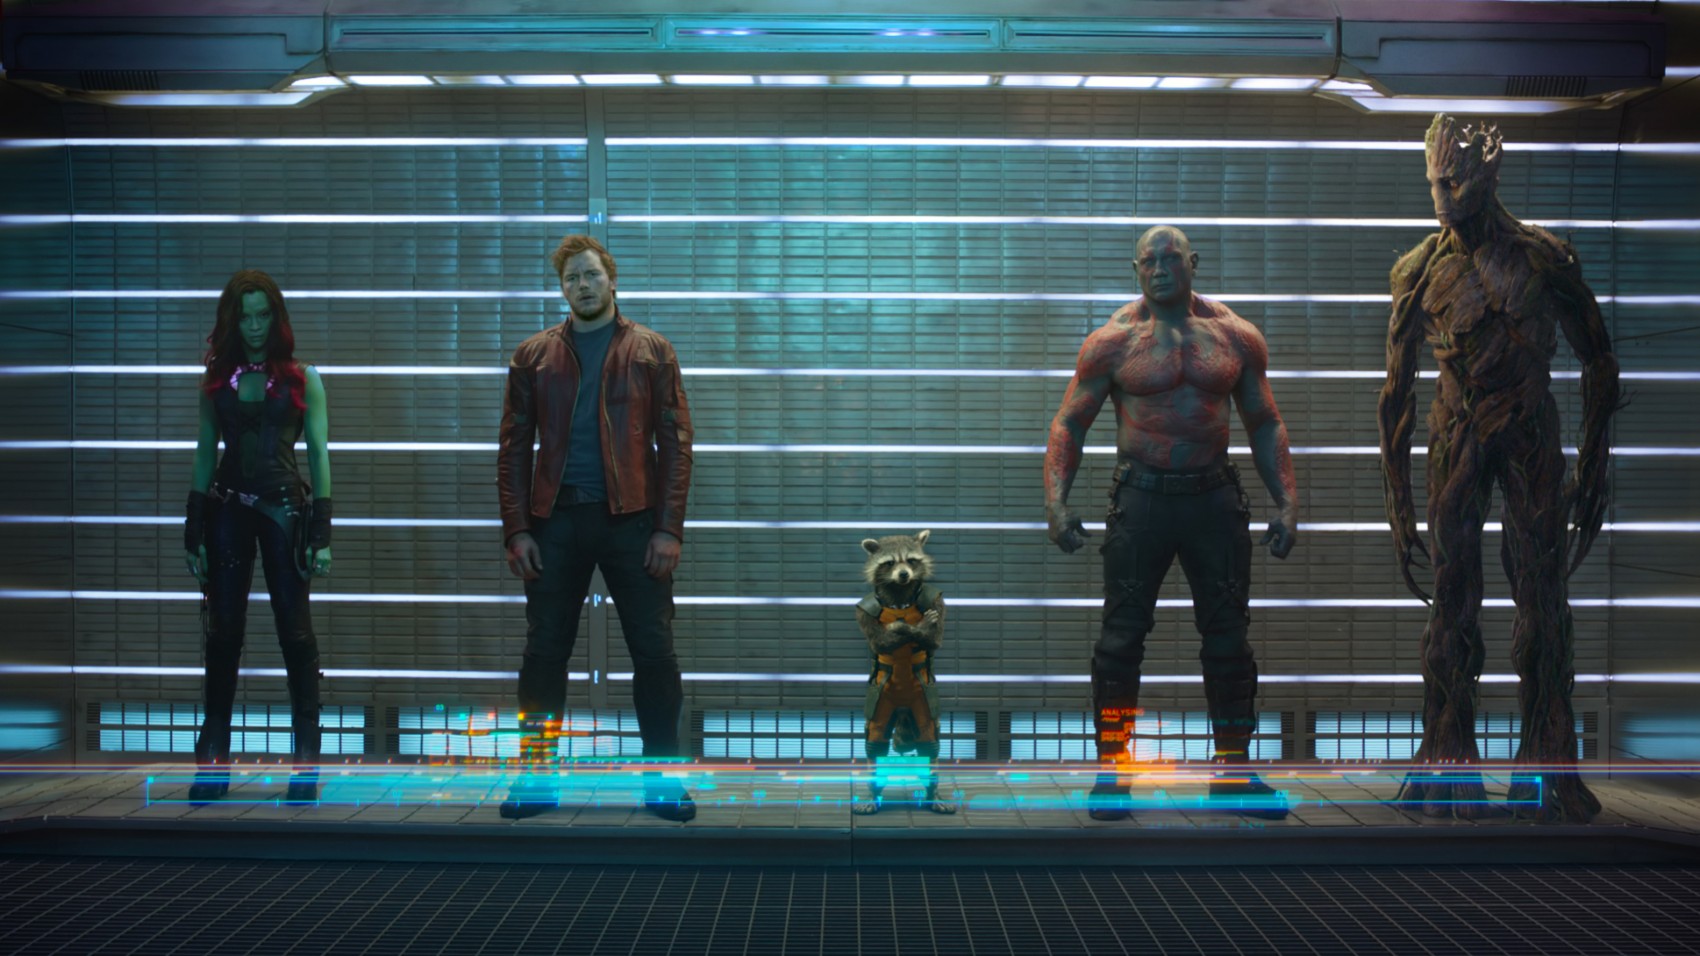 Marvel's Guardians Of The Galaxy

L to R: Gamora (Zoe Saldana), Peter Quill/Star-Lord (Chris Pratt), Rocket Raccoon (voiced by Bradley Cooper), Drax The Destroyer (Dave Bautista) and Groot (voiced by Vin Diesel)

Ph: Film Frame

©Marvel 2014